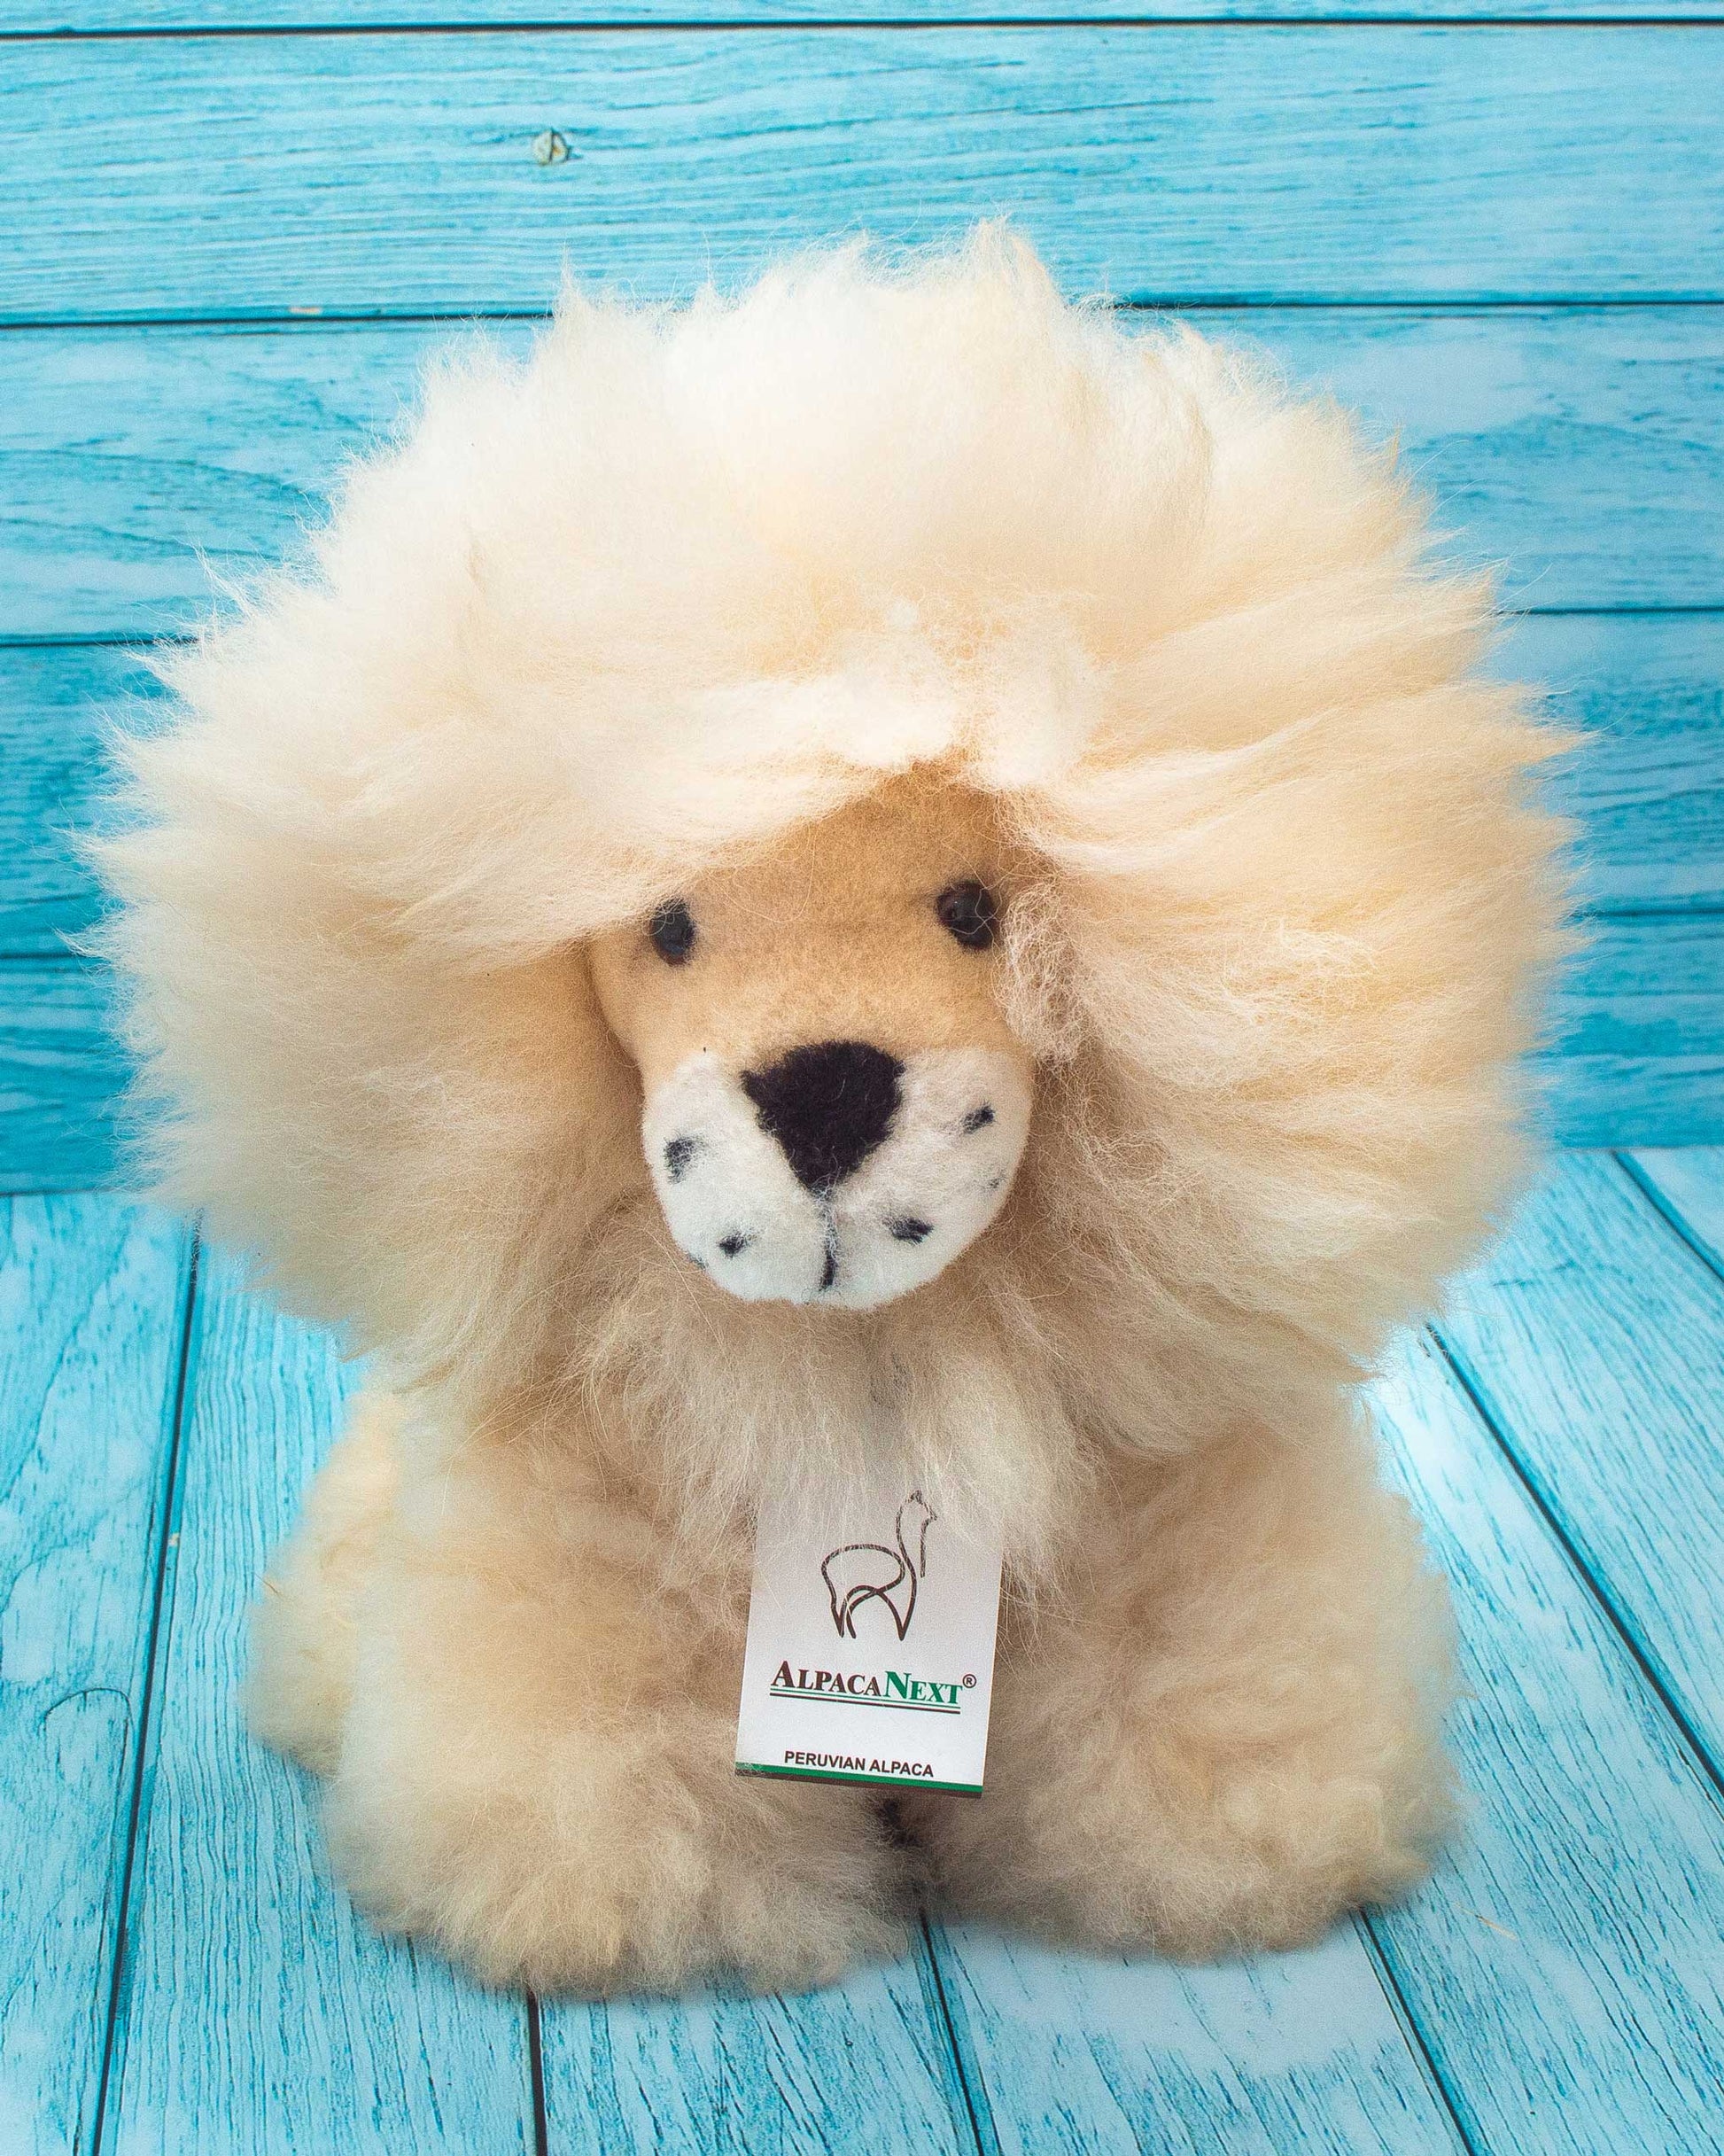 Soft stuffed lion handmmade on natural alpaca wool. Fluffy and cuddly